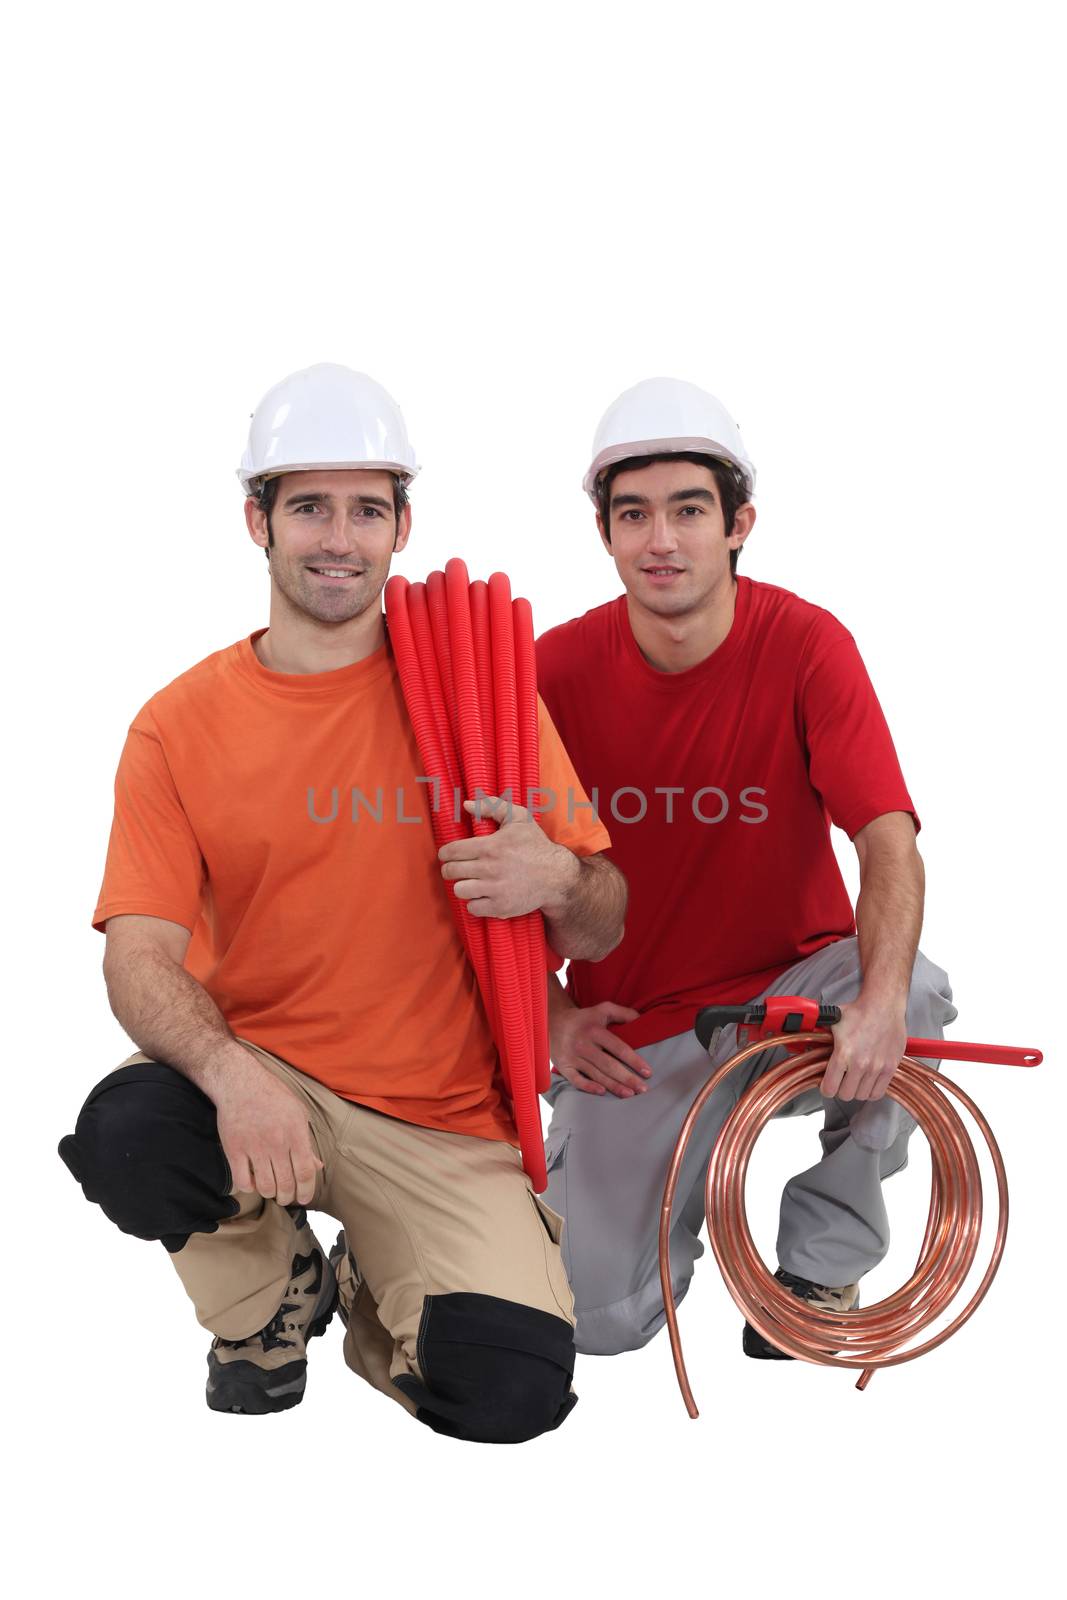 Kneeling tradesmen holding building materials and tools by phovoir